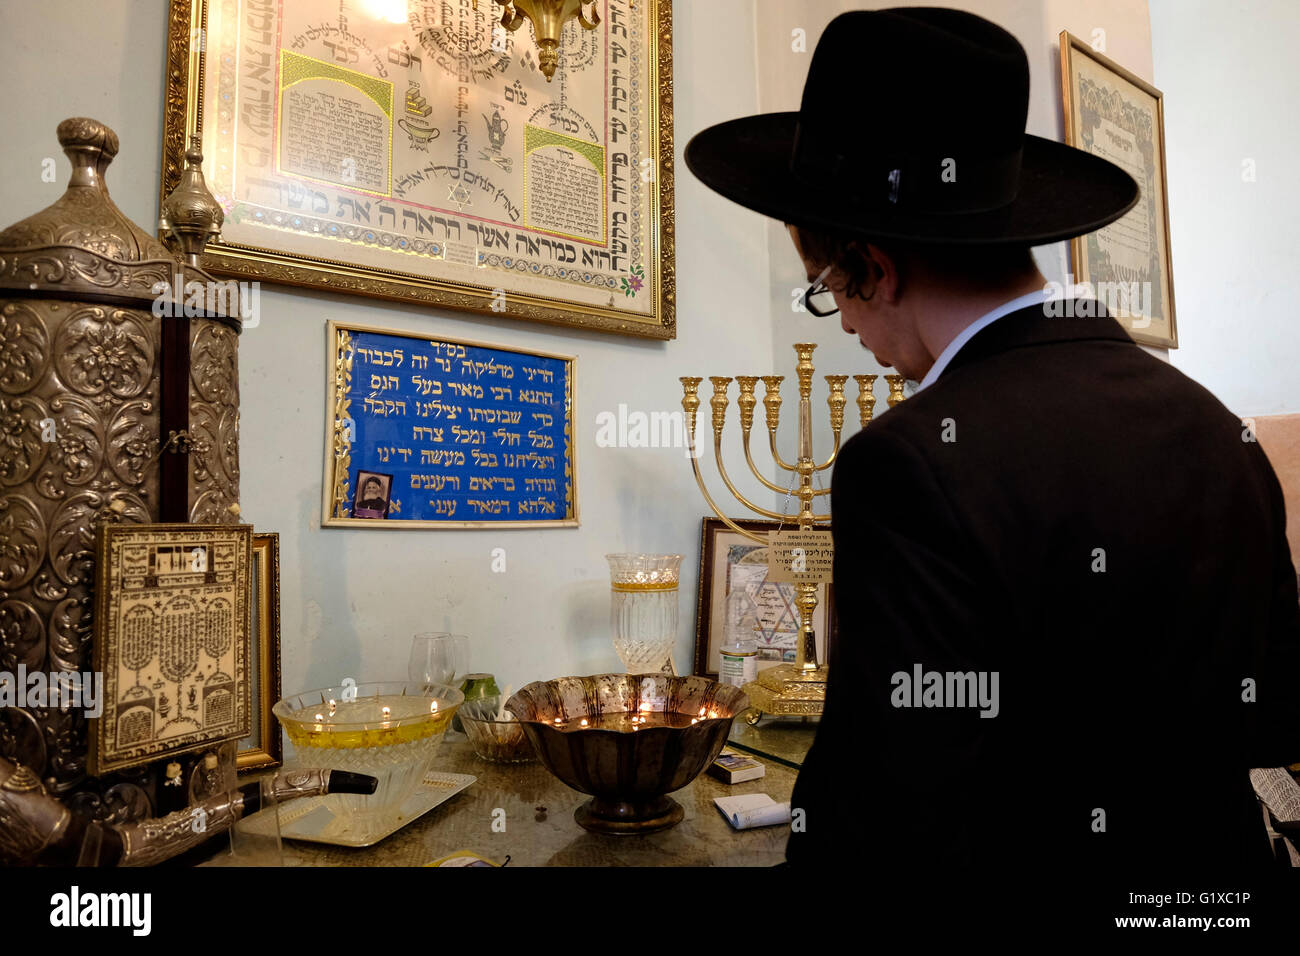 An ultra orthodox Jew praying inside the tomb of Rabbi Meir Baal Hanes who lived around 217 CE and is considered  a major Jewish pilgrimage site in Israel located in the city of Tiberias Israel Stock Photo